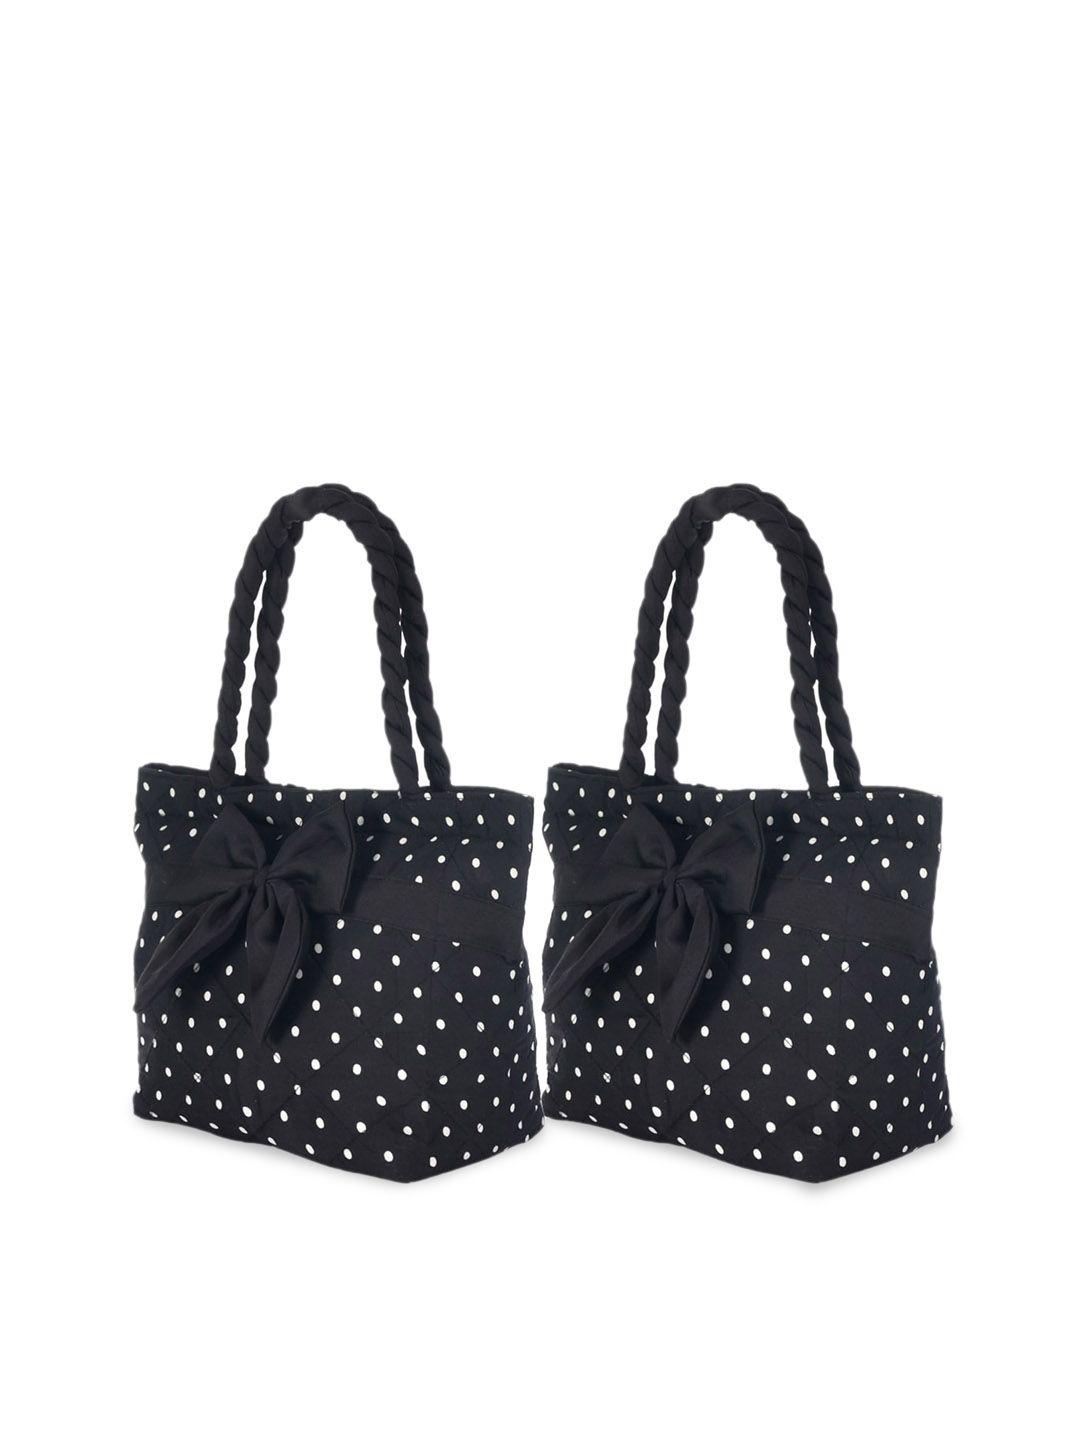 kuber industries women black geometric printed swagger shoulder bag with bow detail